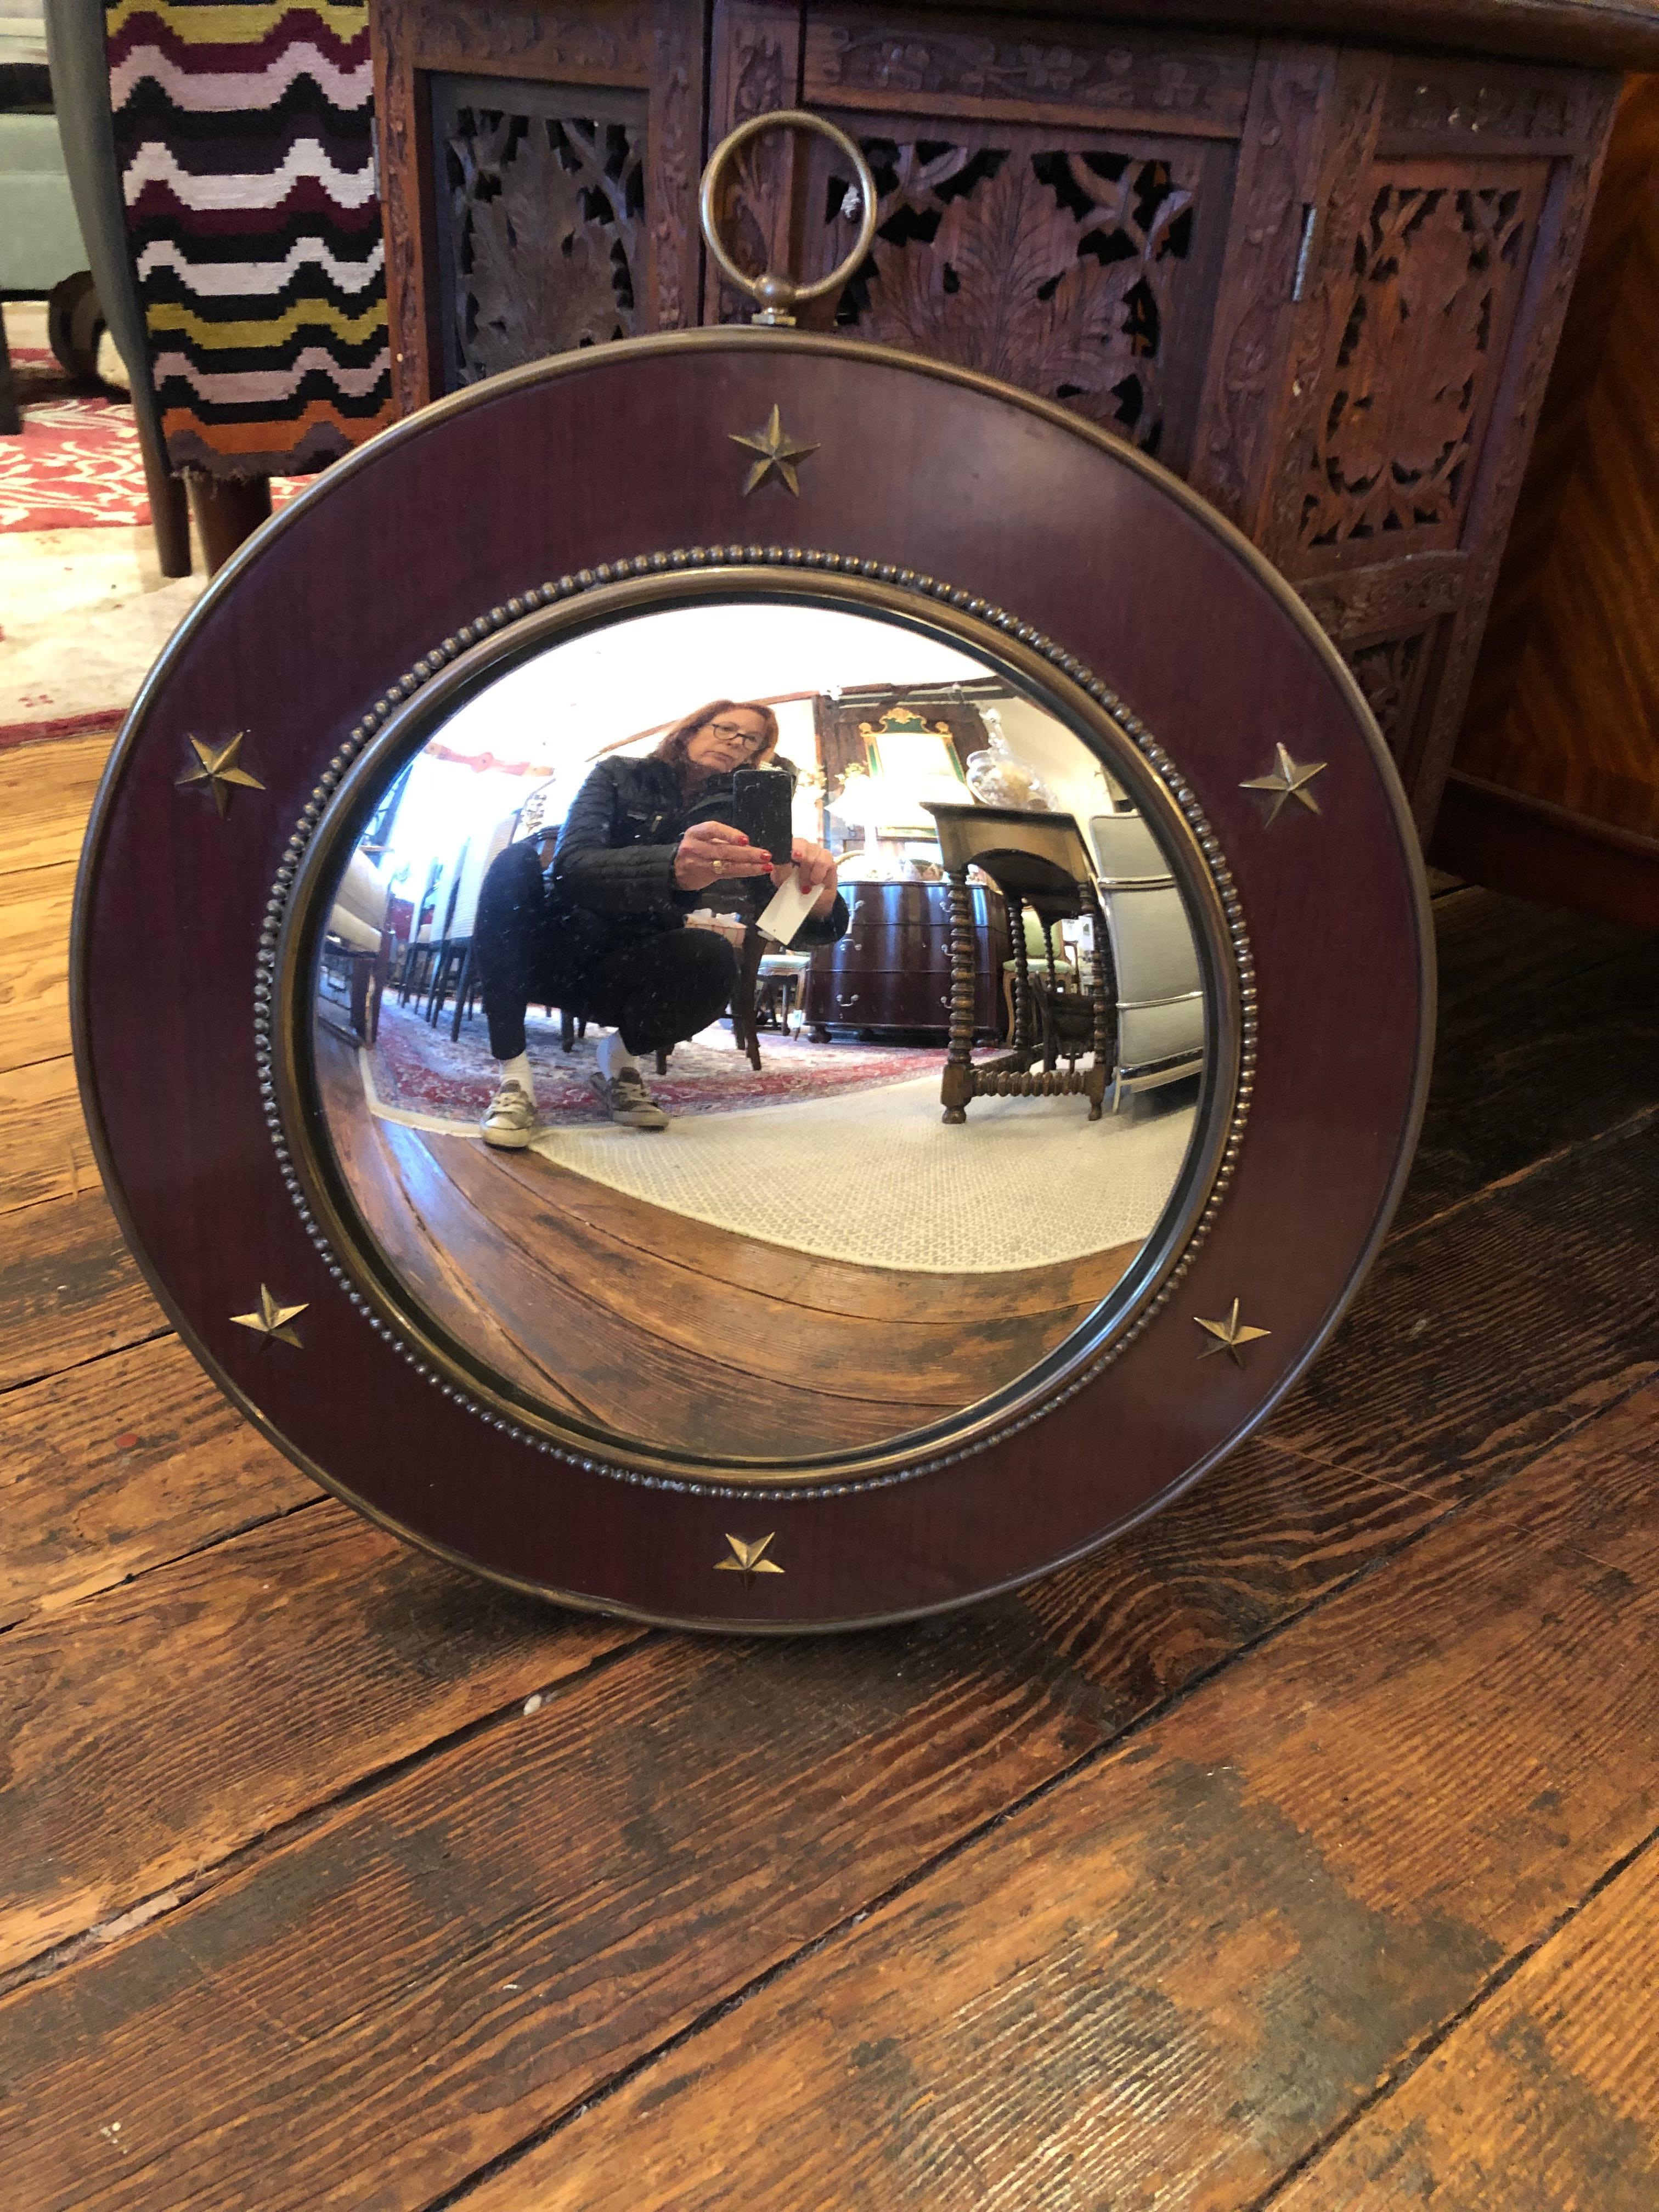 Handsome round convex mirror having mahogany frame with brass periphery and brass star embellishments.
mirror is 12